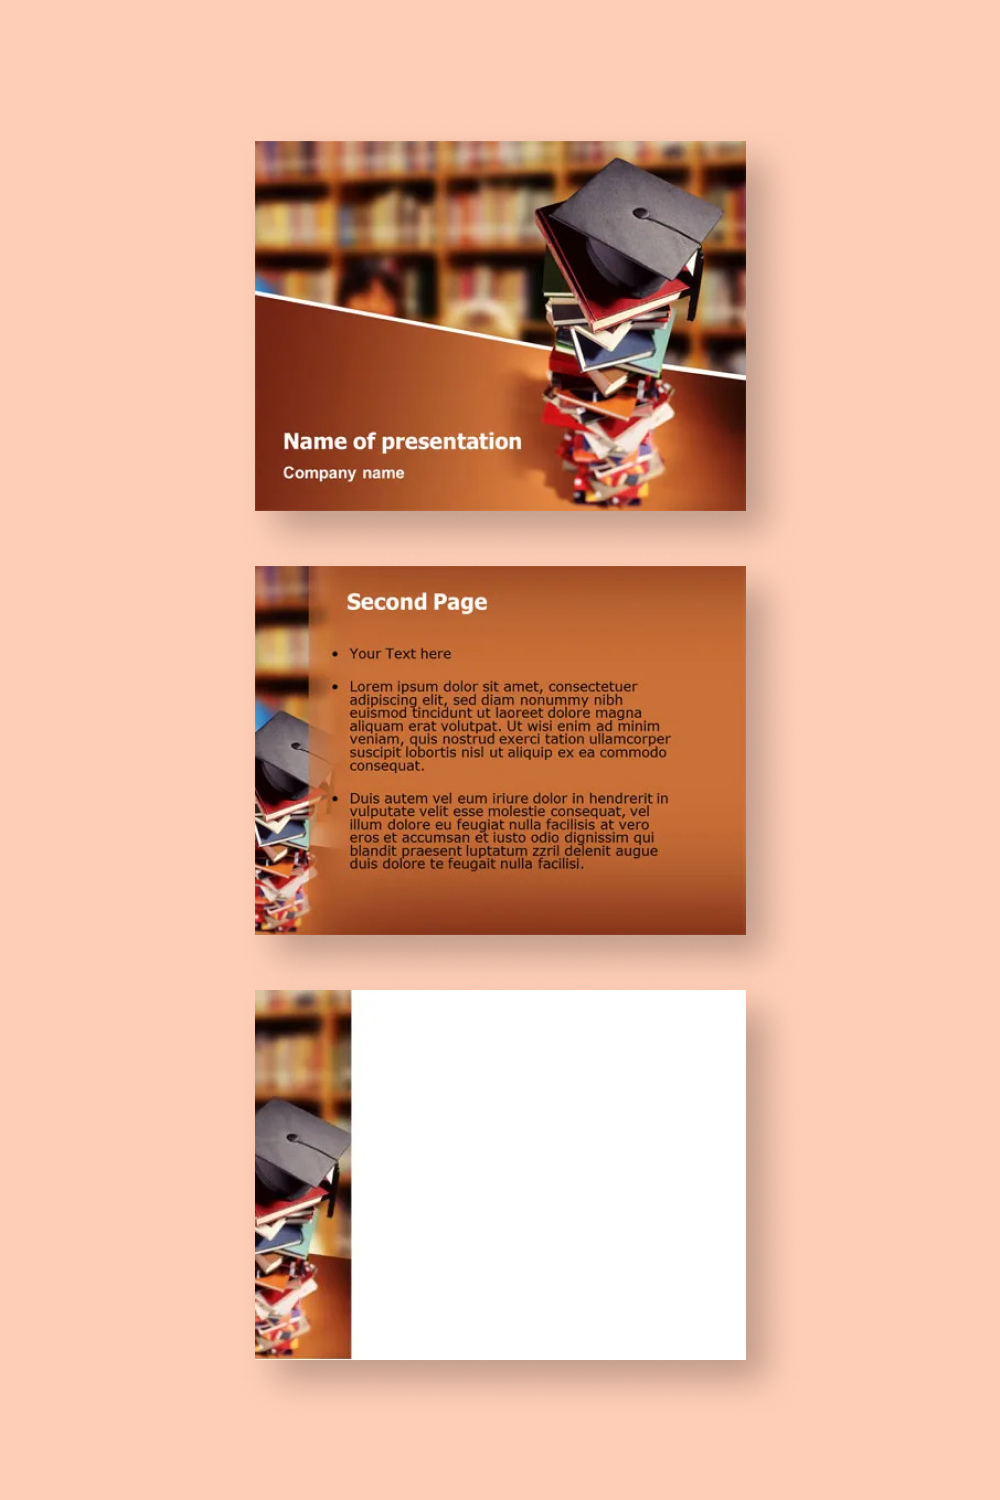 Three pages of presentation with photo of books and brown background.